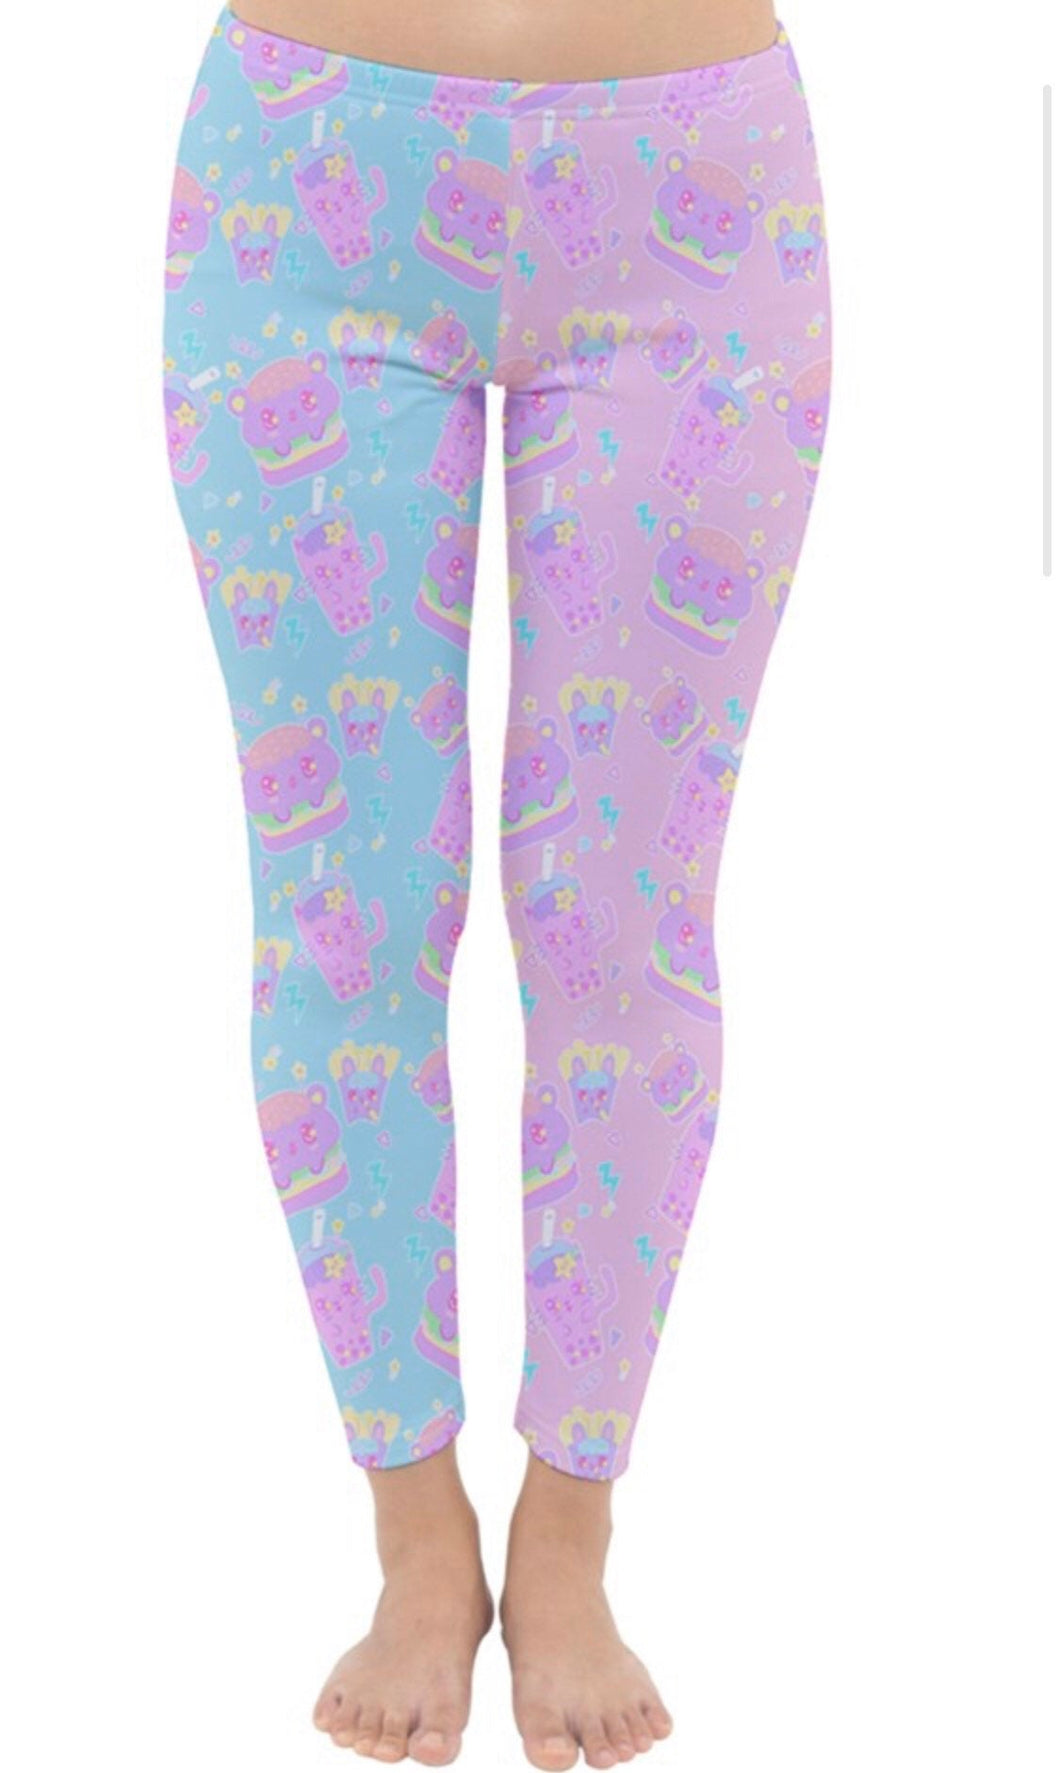 Dreamy Alien Junk Food Party Leggings ver.1 (Made to Order)